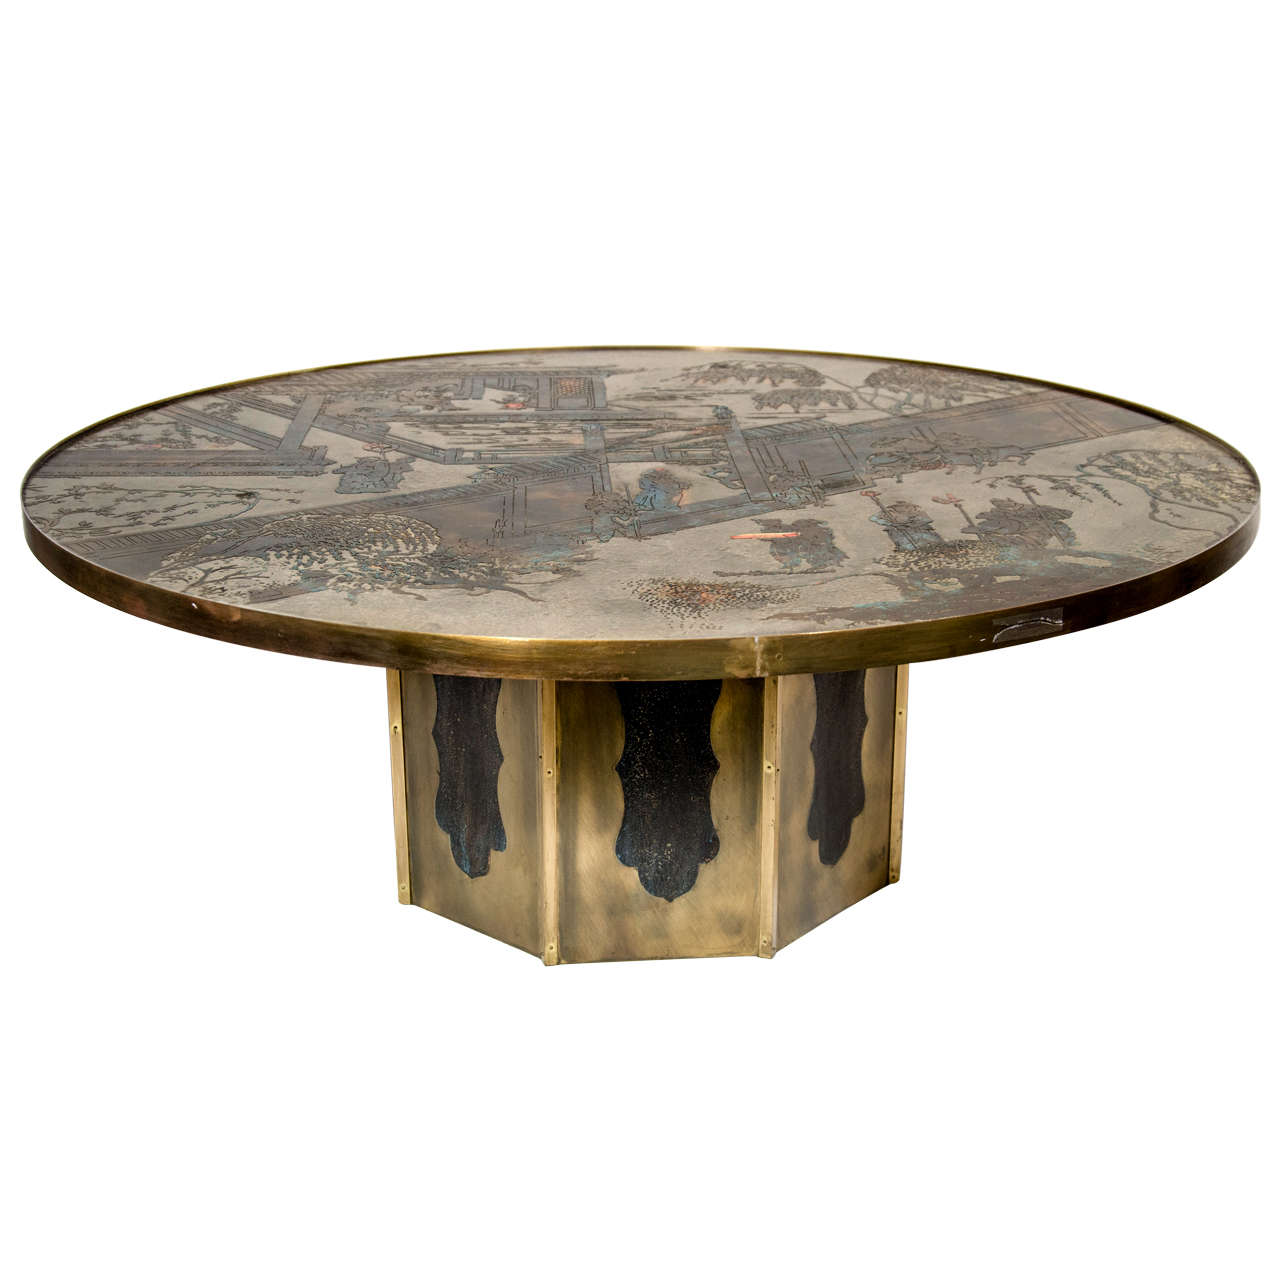 A Unique Philip & Kevin Laverne Chinoiserie American Patinated & Enameled Bronze Coffee Table For Sale